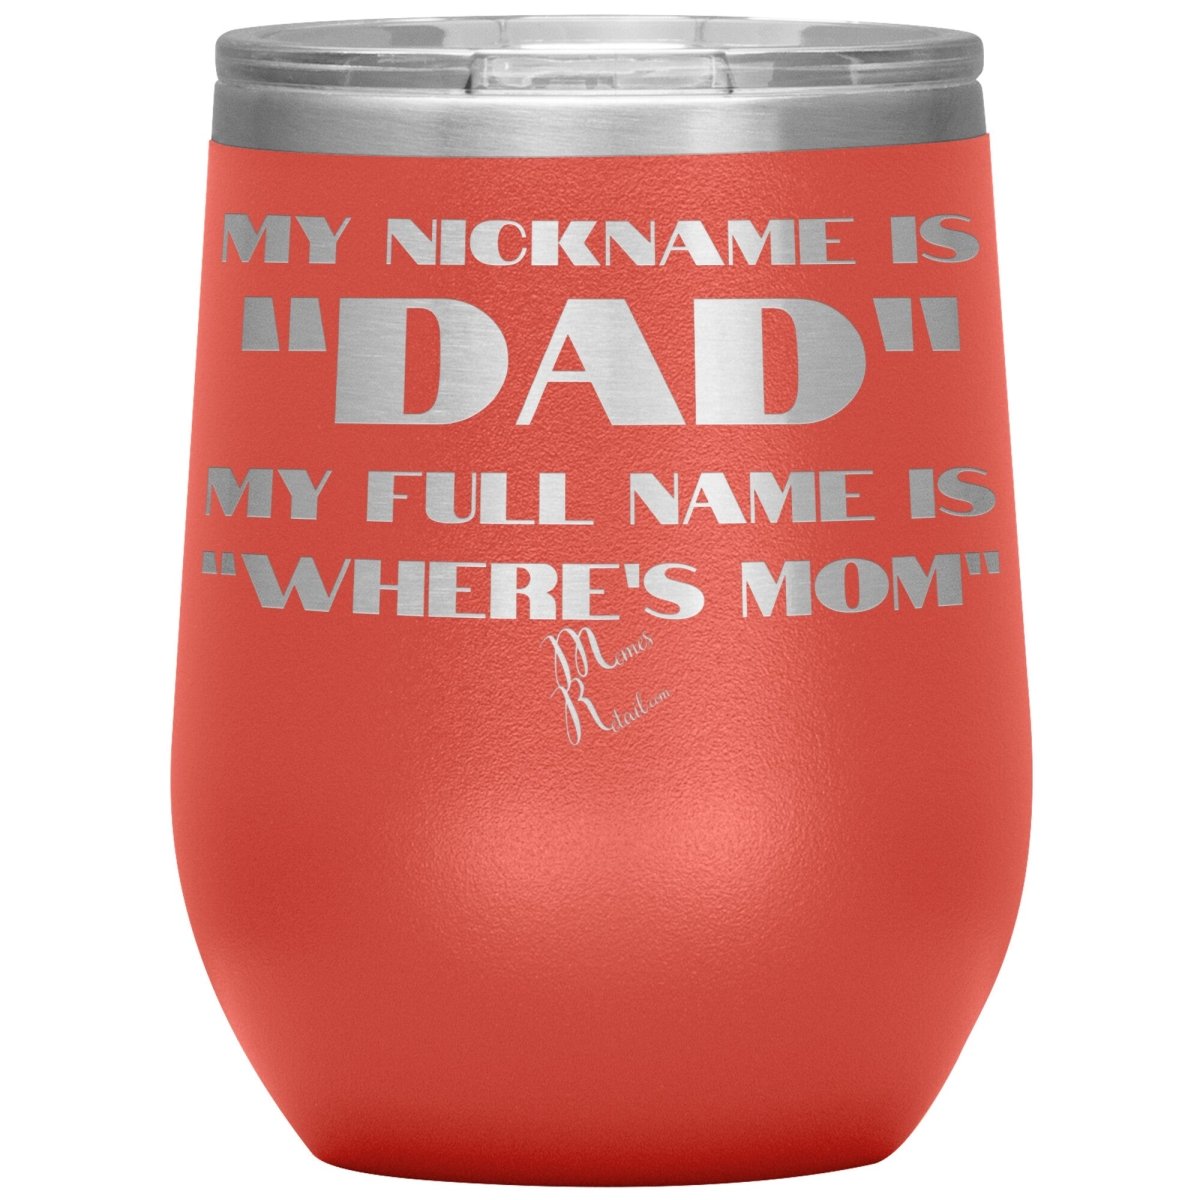 My Nickname is "Dad", My Full Name is "Where's Mom" Tumblers, 12oz Wine Insulated Tumbler / Coral - MemesRetail.com